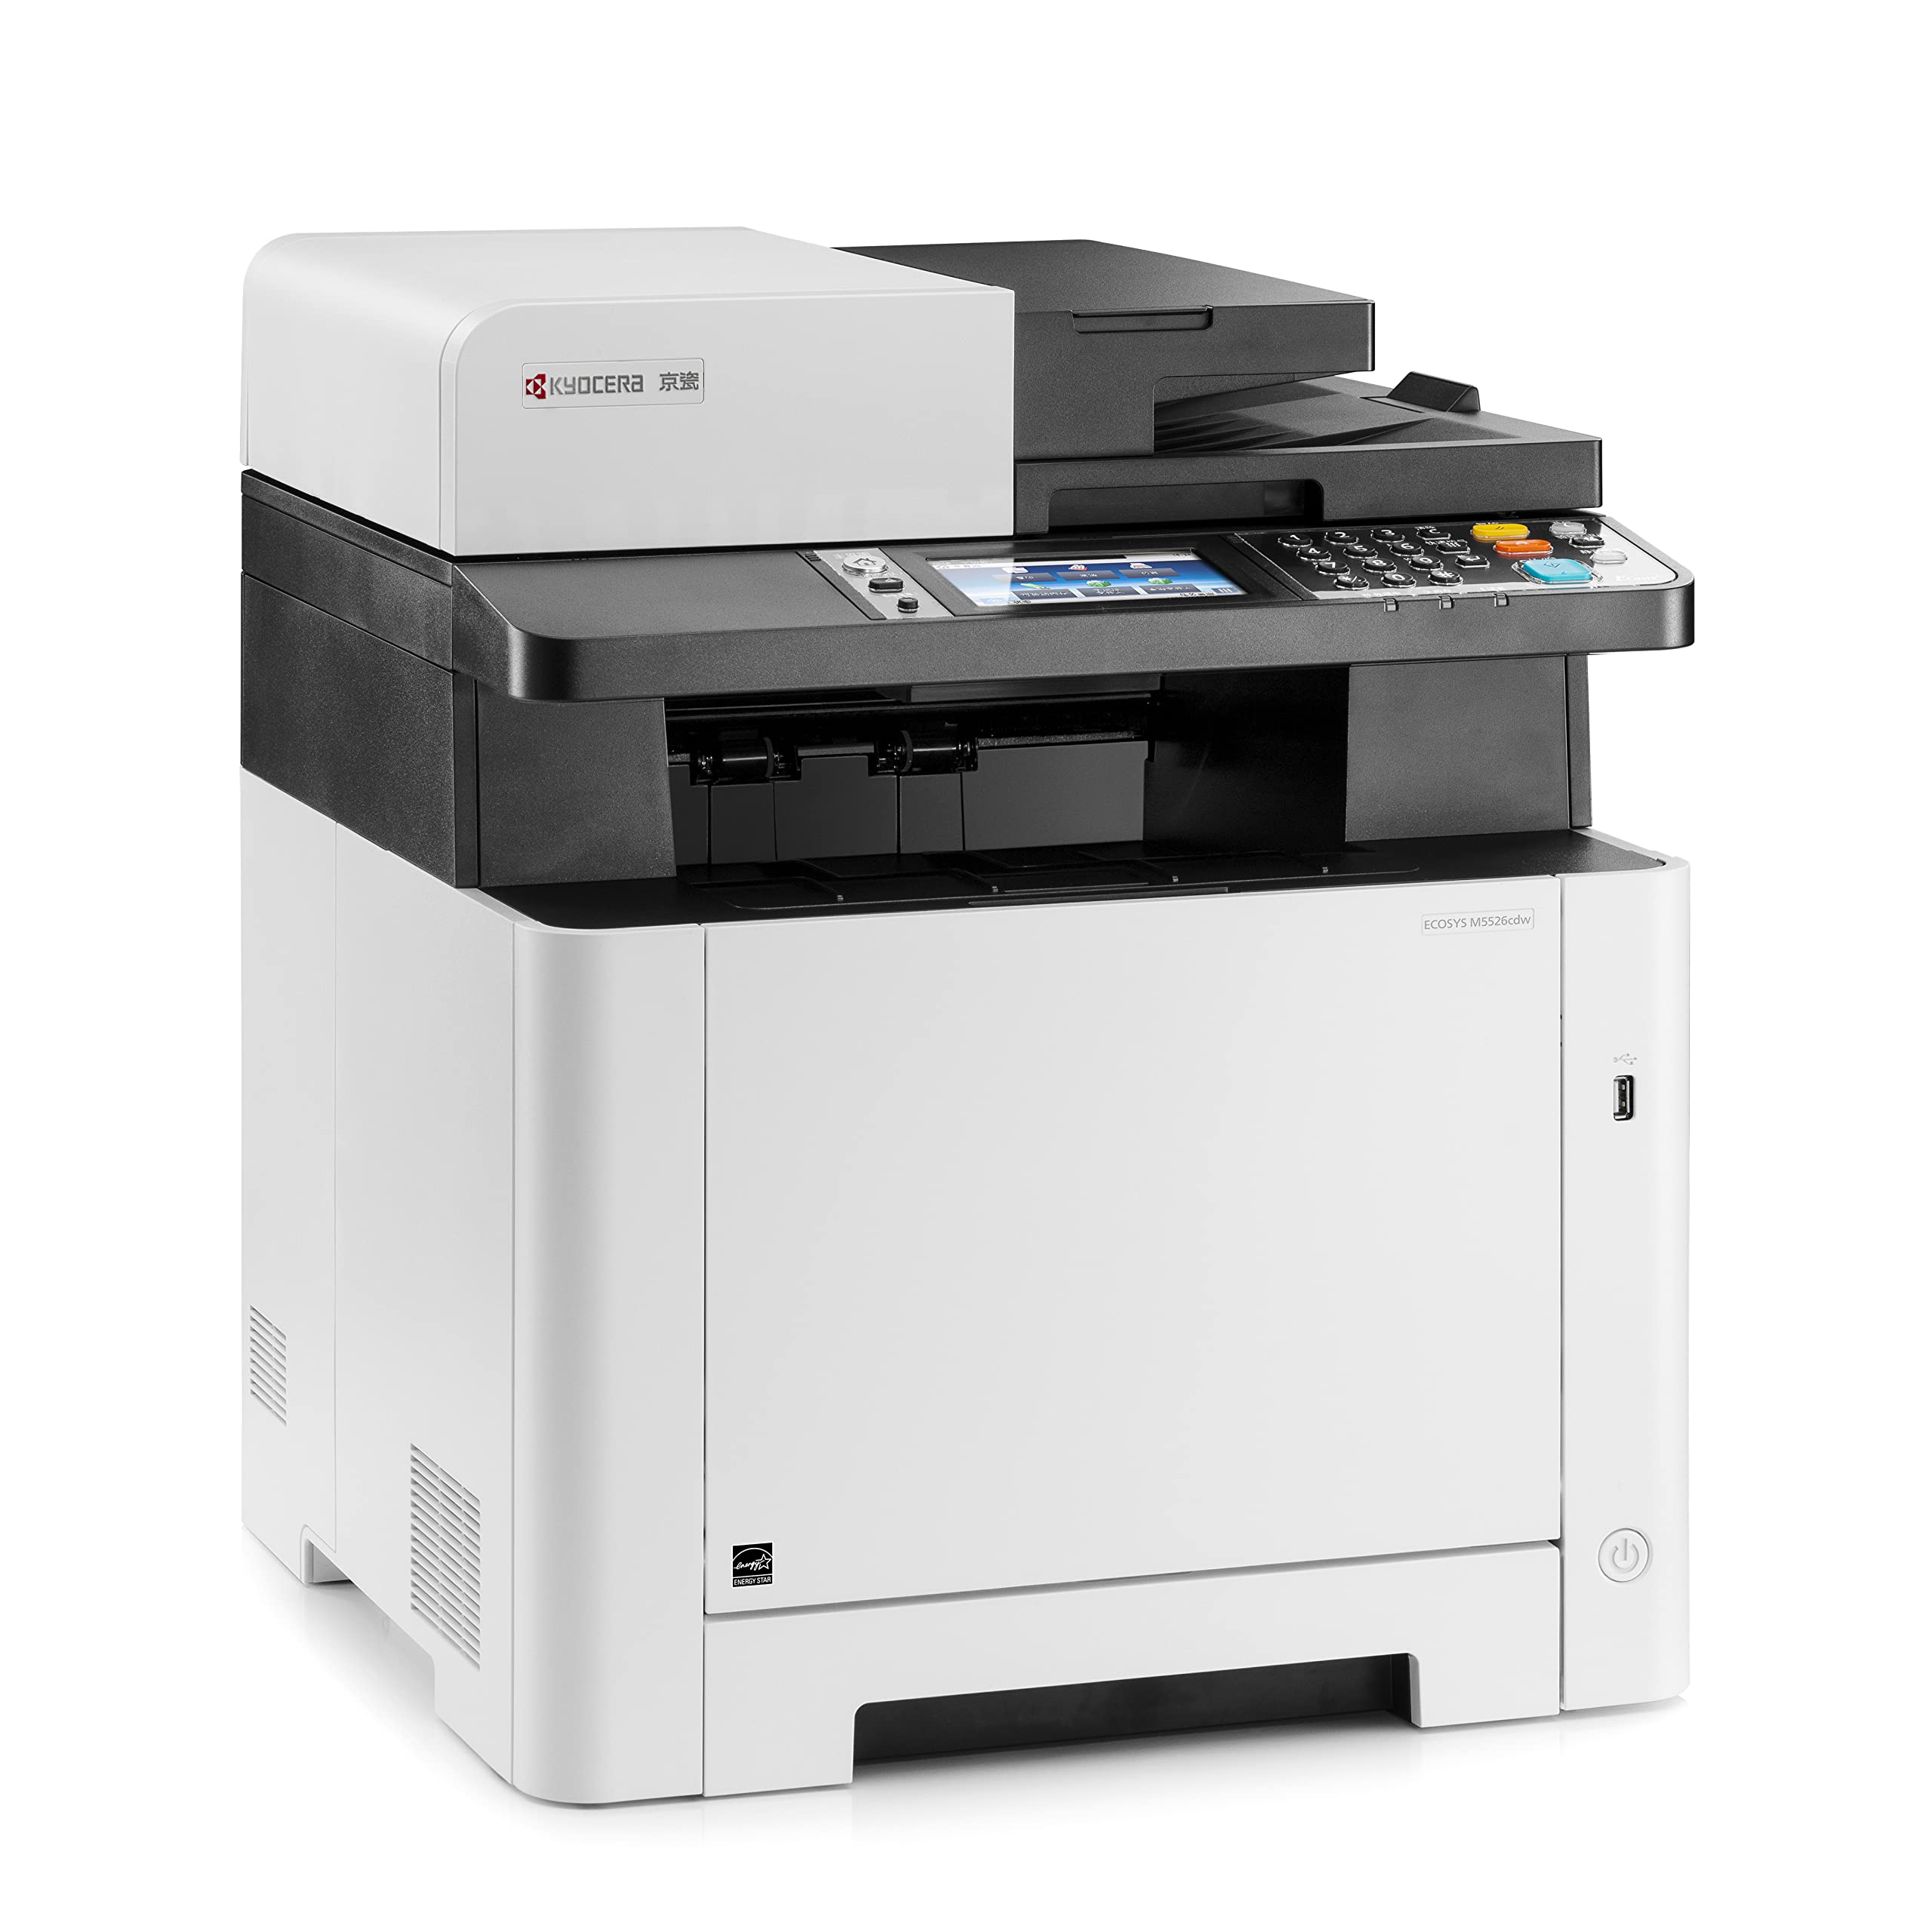 Kyocera ECOSYS M5526cdw All-in-One Color Laser Printer (Print/Copy/Scan/Fax), 27 ppm, Up to Fine 1200 dpi, Gigabit Ethernet, Wireless & Wi-Fi Direct, Standard Duplex, 4.3in Touchscreen Panel, 512 MB